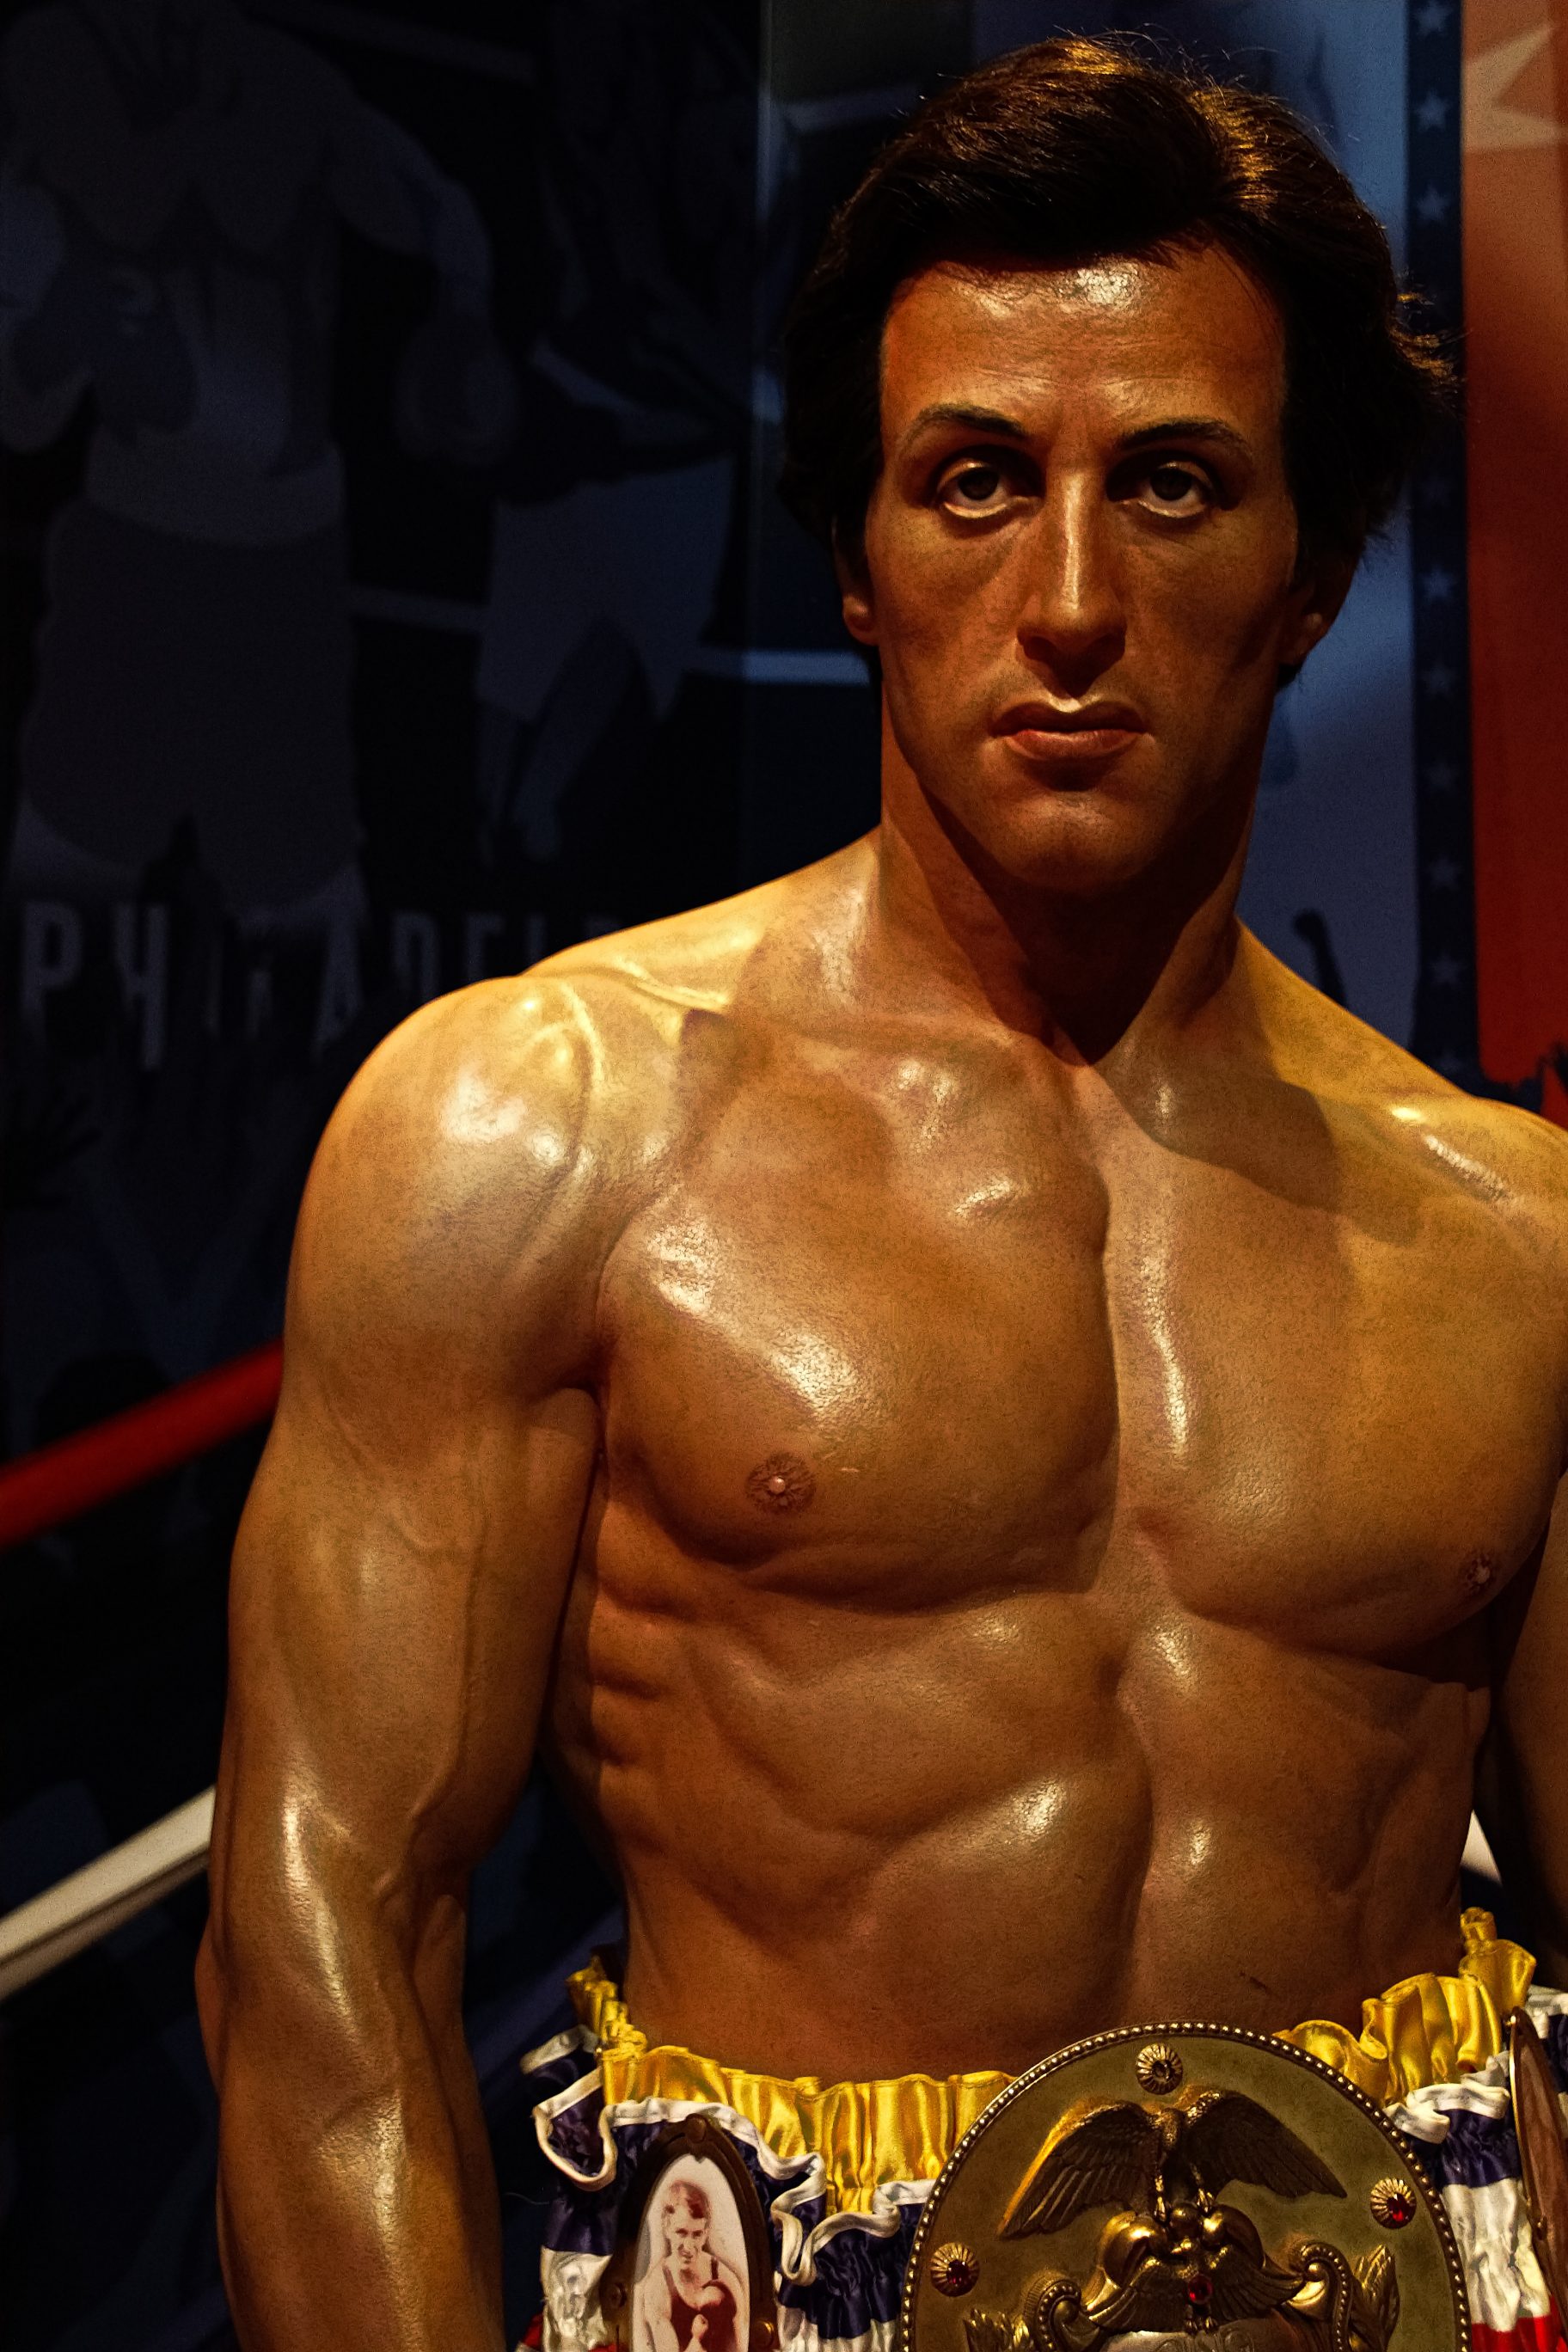 Sylvester Stallone as Rocky Balboa in Madame Tussauds Hollywood wax museum